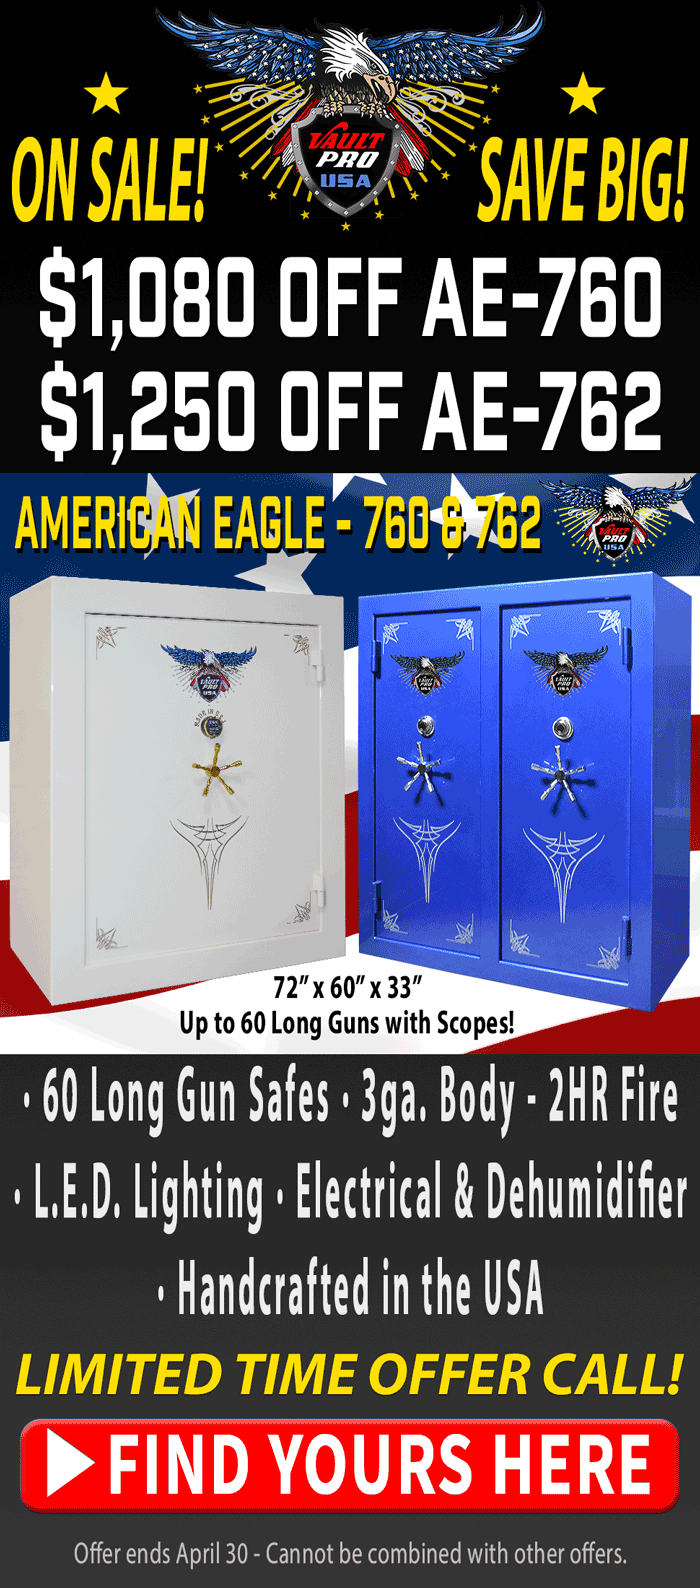 American made safes on sale. Special promotion. Free LED Lighting, Electrical and Jewelry Drawer factory installed. Safes made by Vault Pro USA